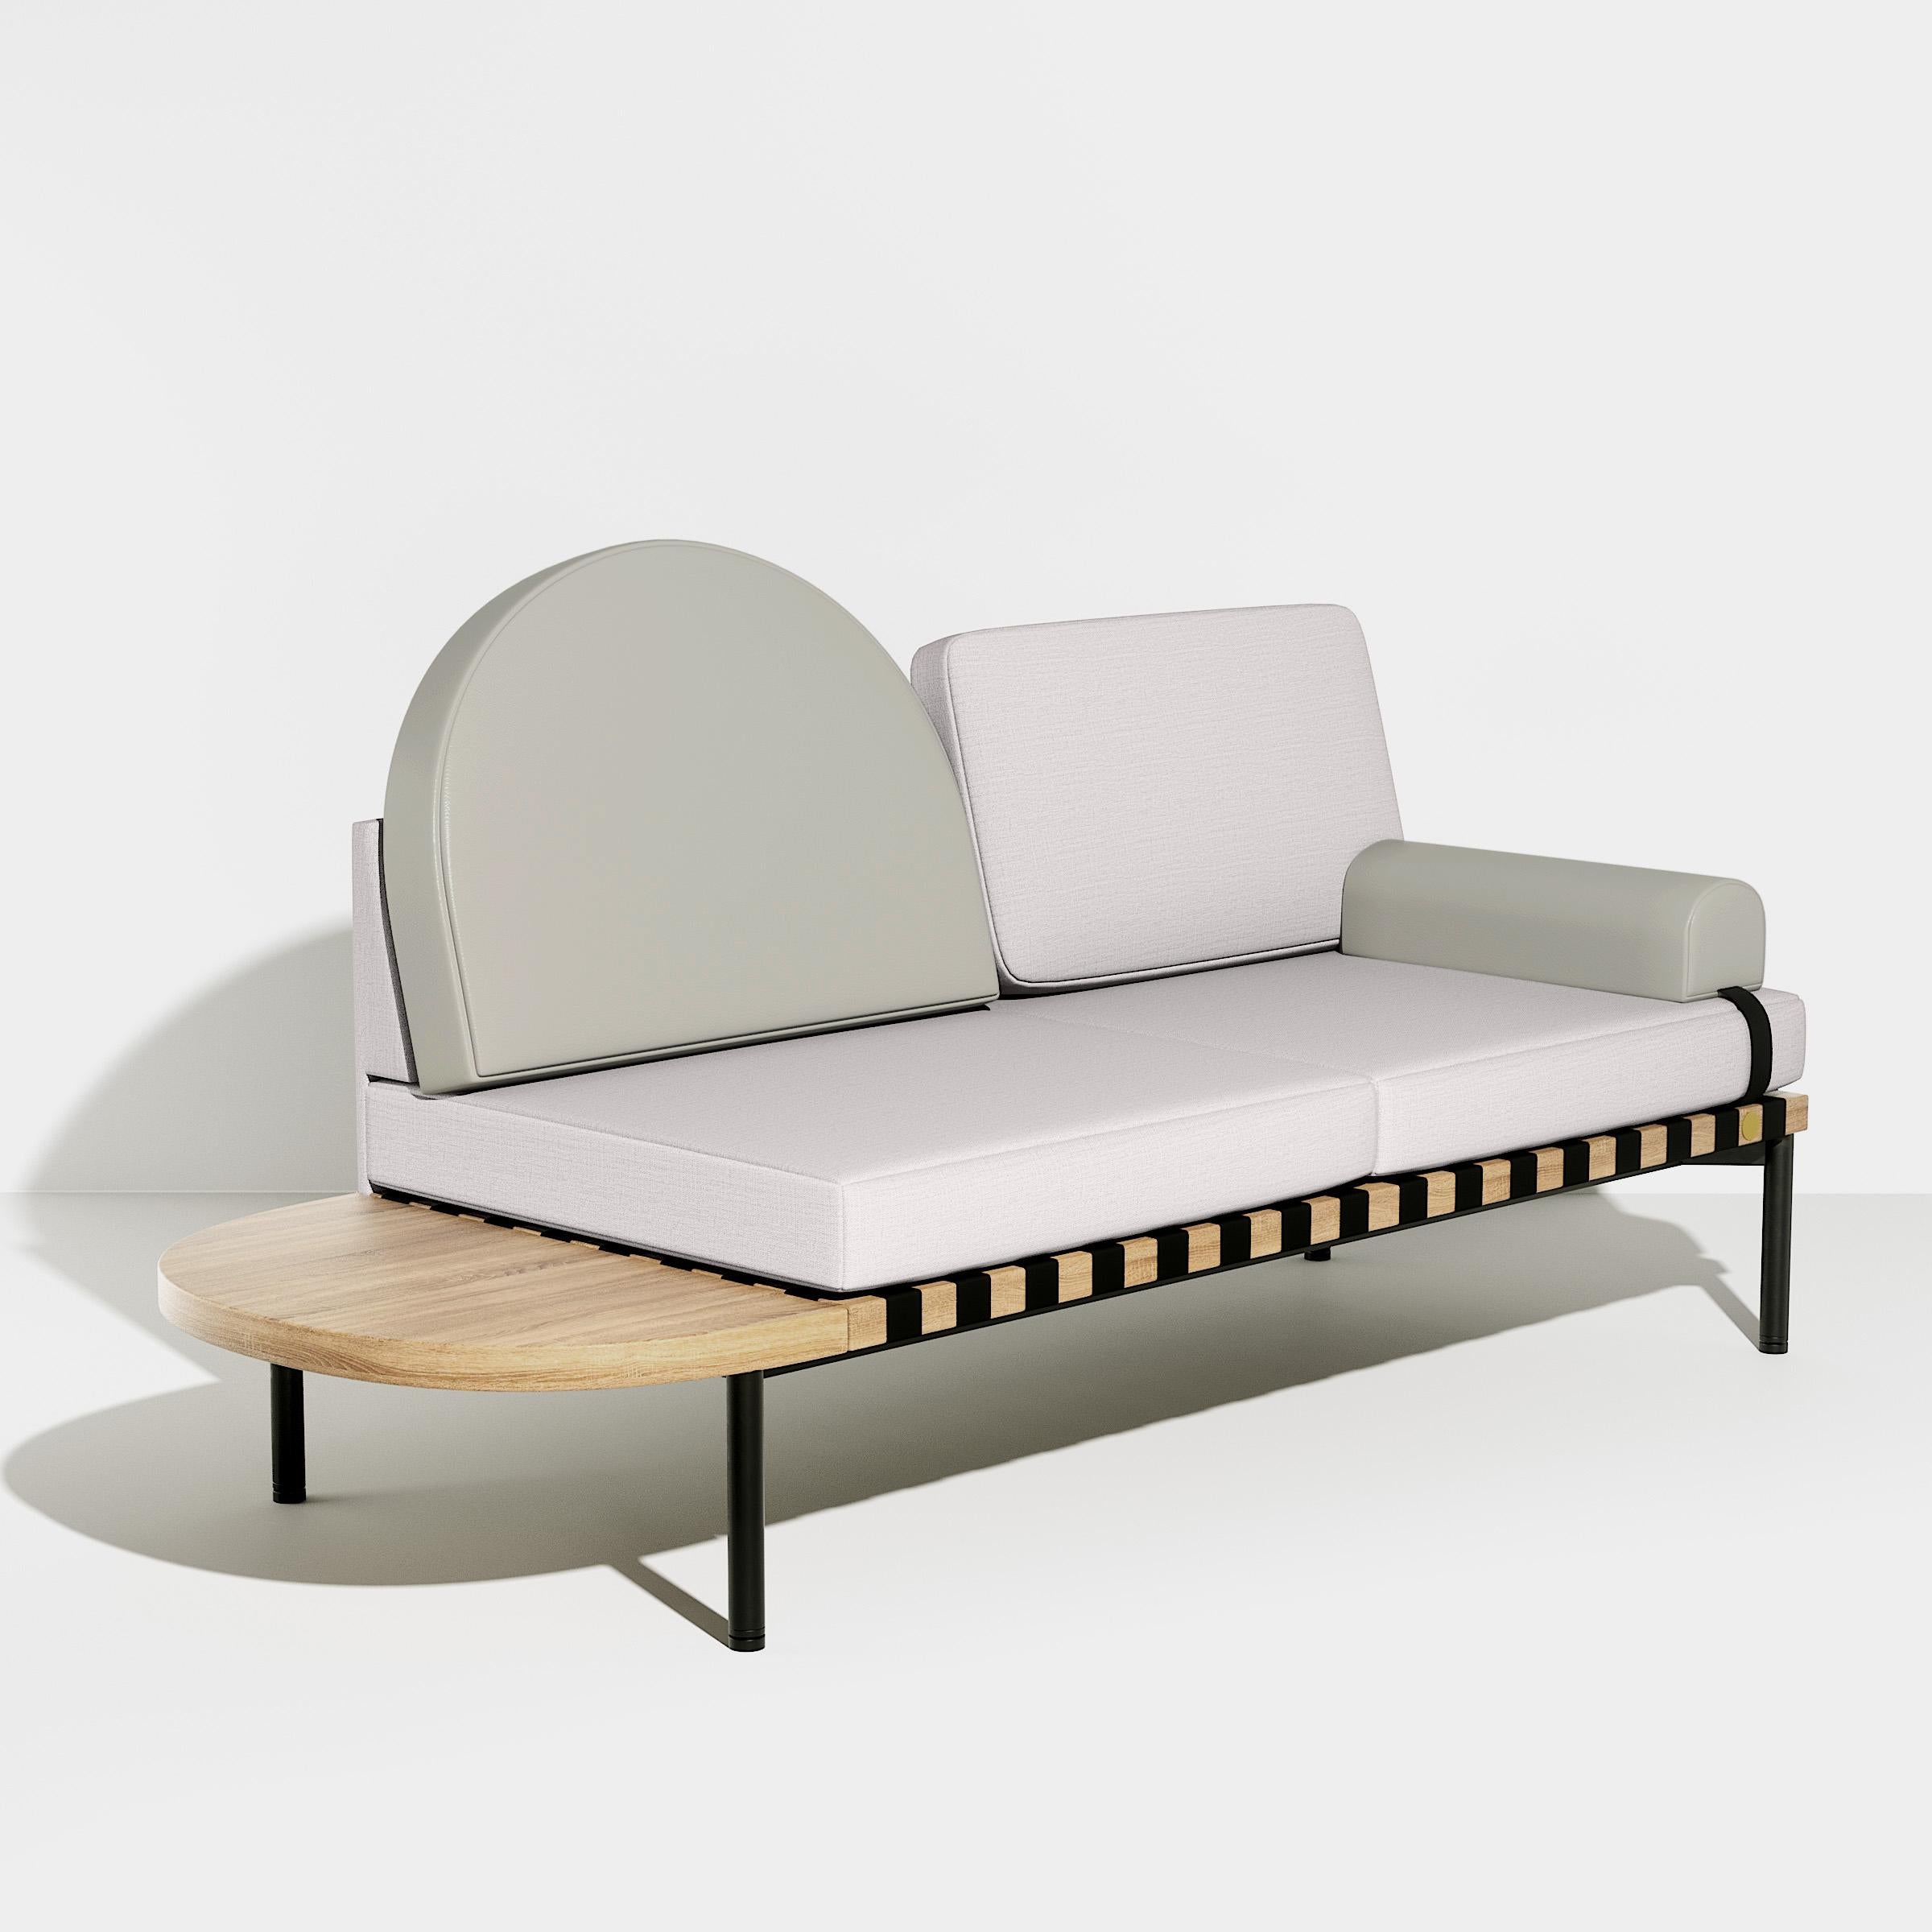 Petite Friture Grid Daybed in Grey-blue Upholstery by Studio Pool, 2015

Pool designed the Grid collection in reference to the Bauhaus style and in honour of the graphic talents. Each element of this all-modular system retains the identity of the